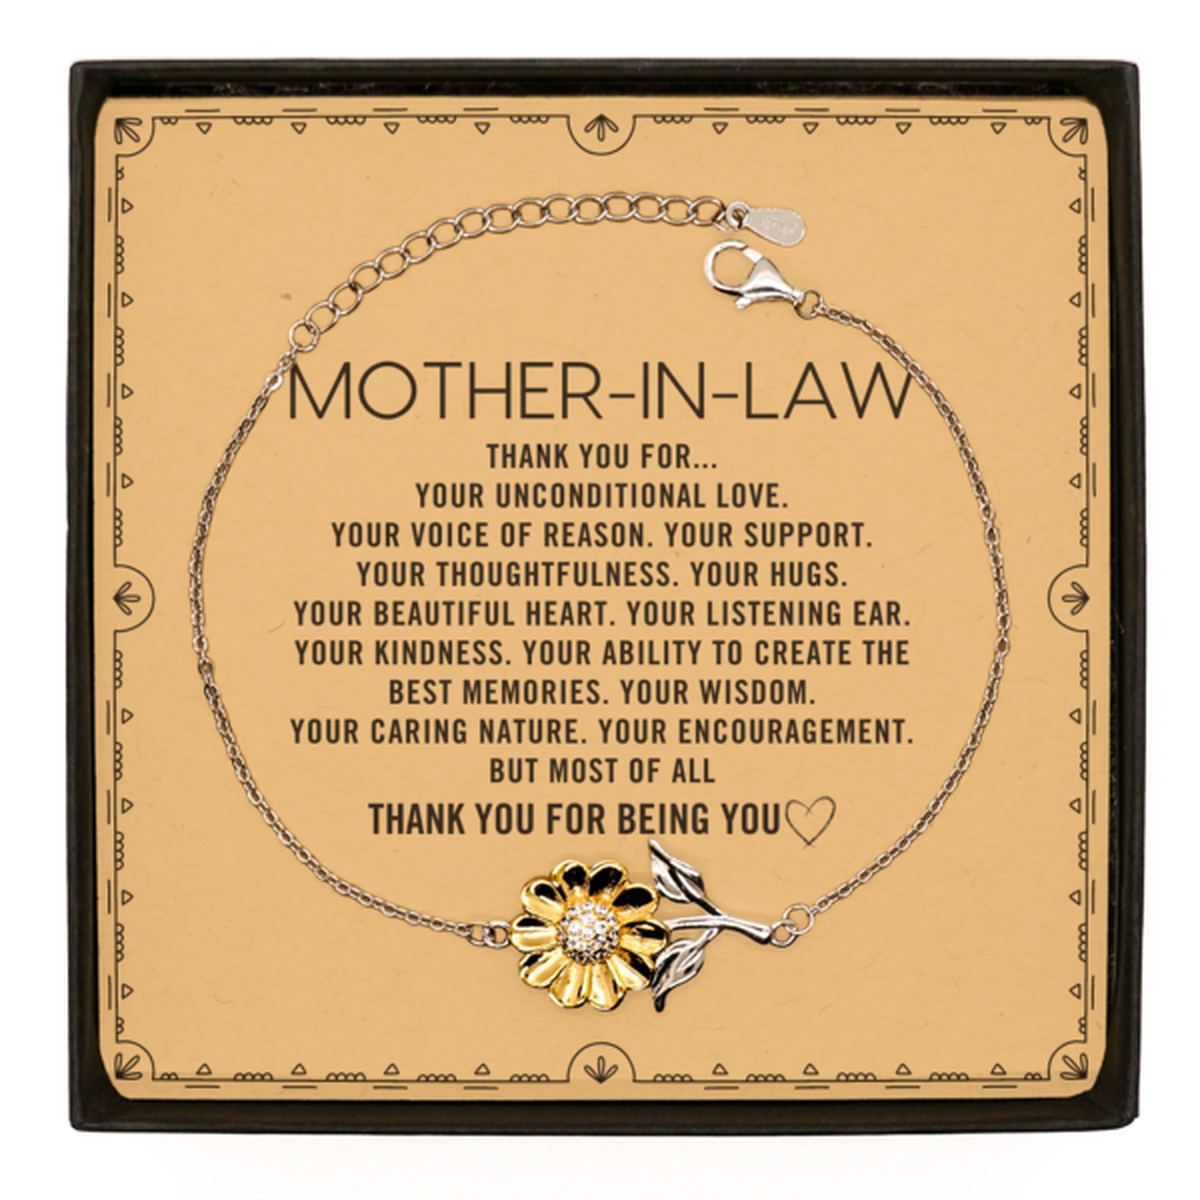 Mother-In-Law Sunflower Bracelet Custom, Message Card Gifts For Mother-In-Law Christmas Graduation Birthday Gifts for Men Women Mother-In-Law Thank you for Your unconditional love